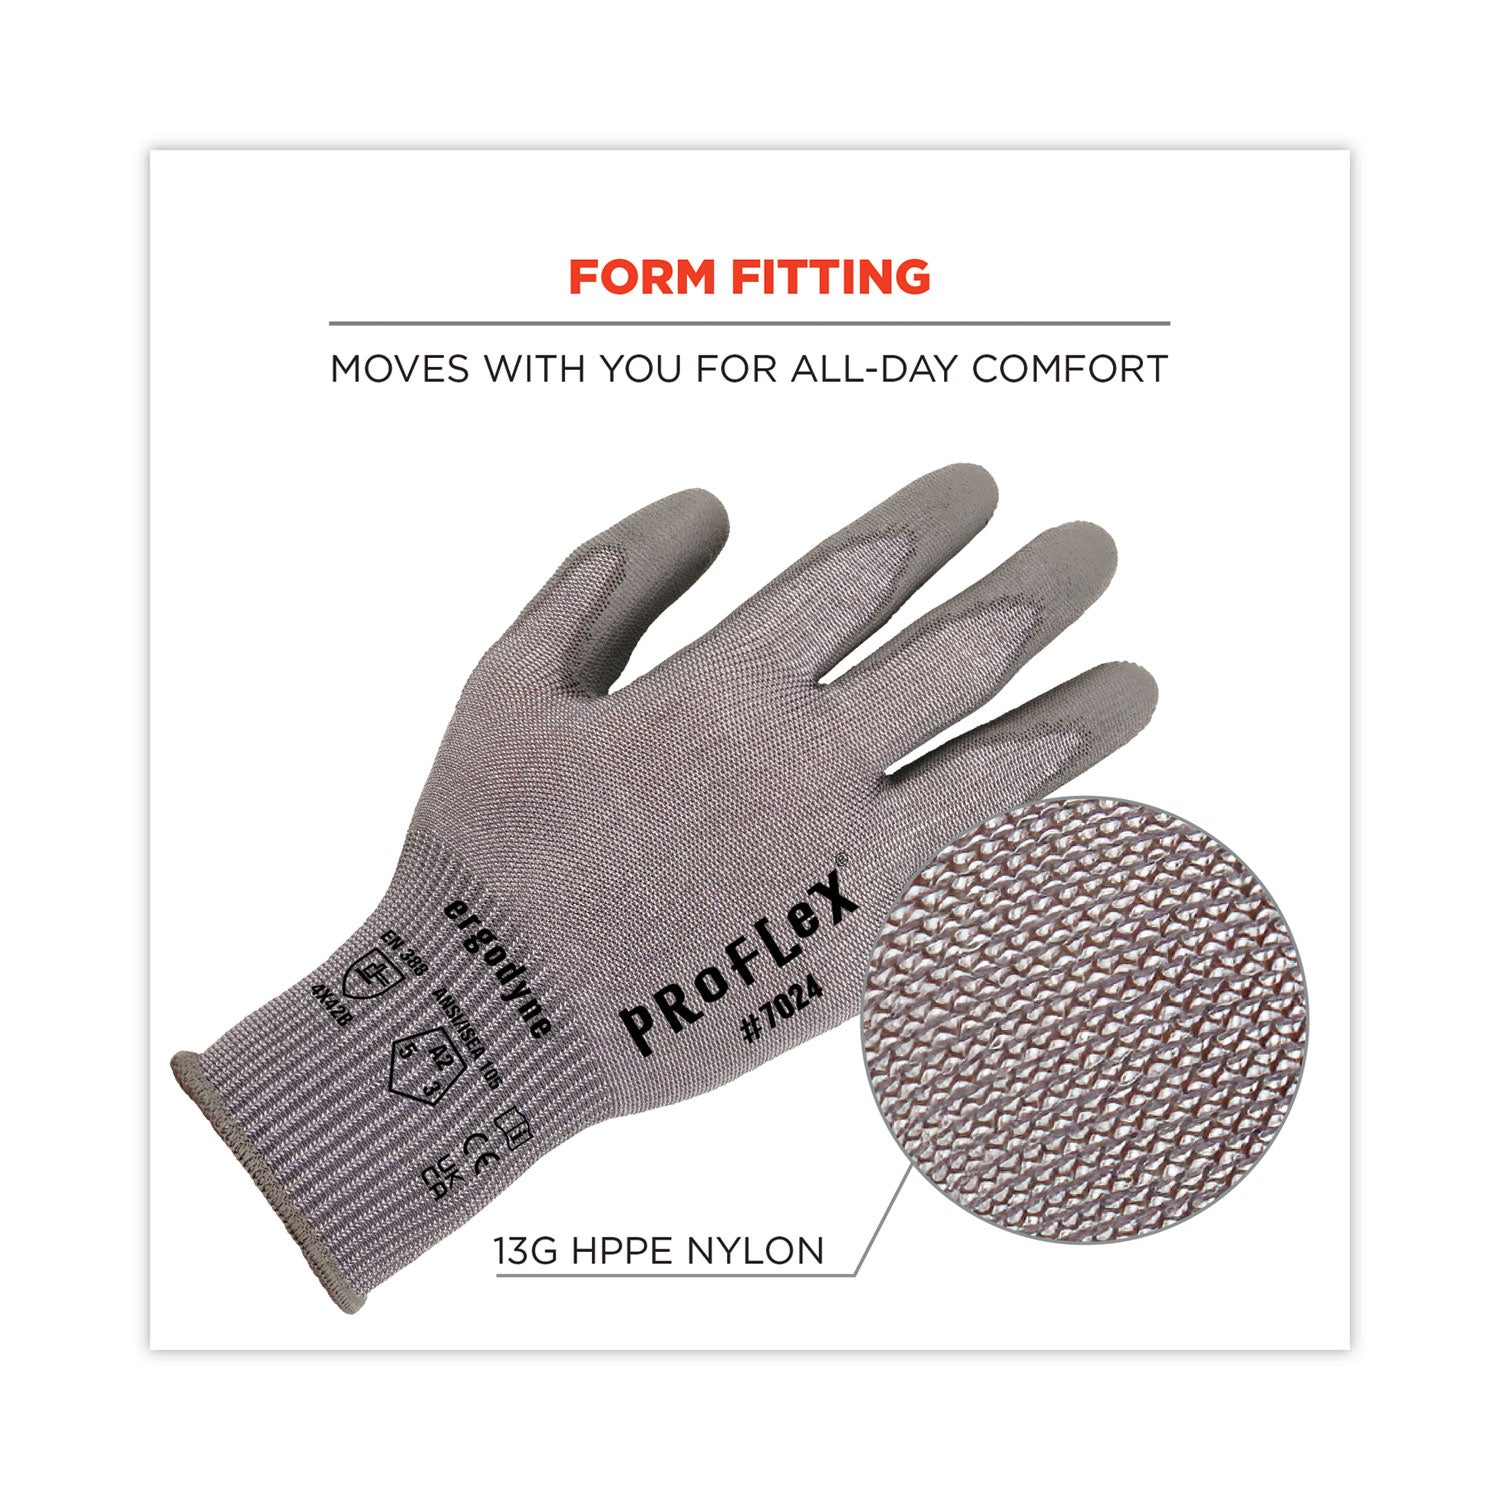 proflex-7024-ansi-a2-pu-coated-cr-gloves-gray-small-pair-ships-in-1-3-business-days_ego10402 - 4